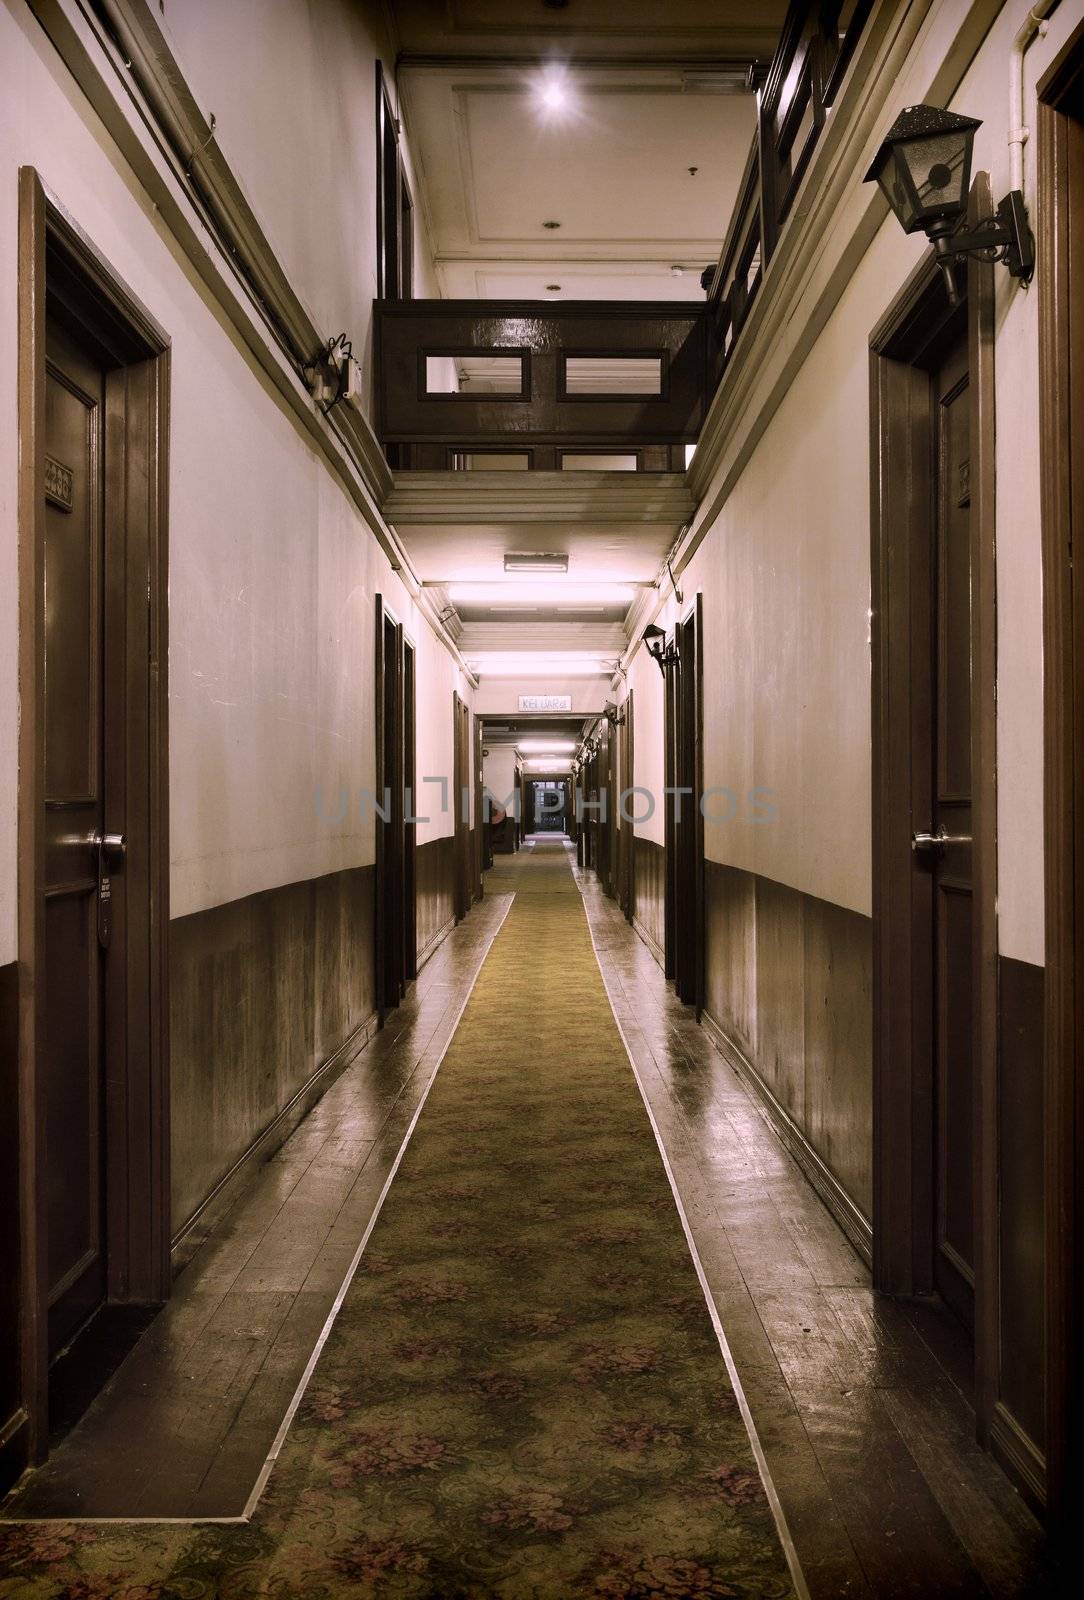 hallway with rooms inside a rough old hotel